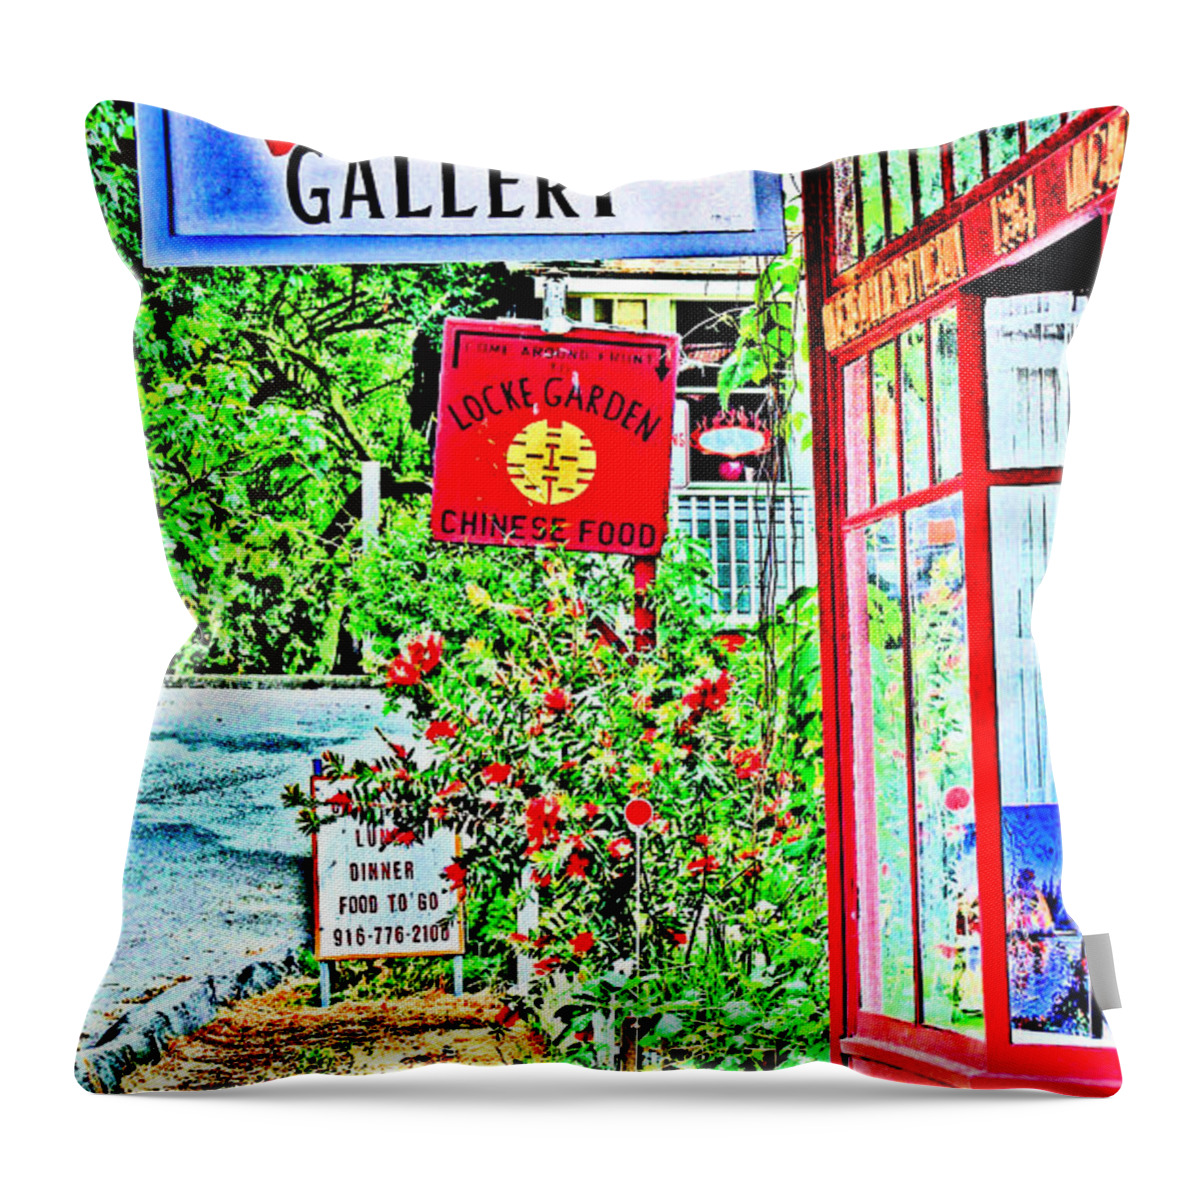 Ning Hou Gallery Throw Pillow featuring the photograph Ning Hou Gallery by Joseph Coulombe